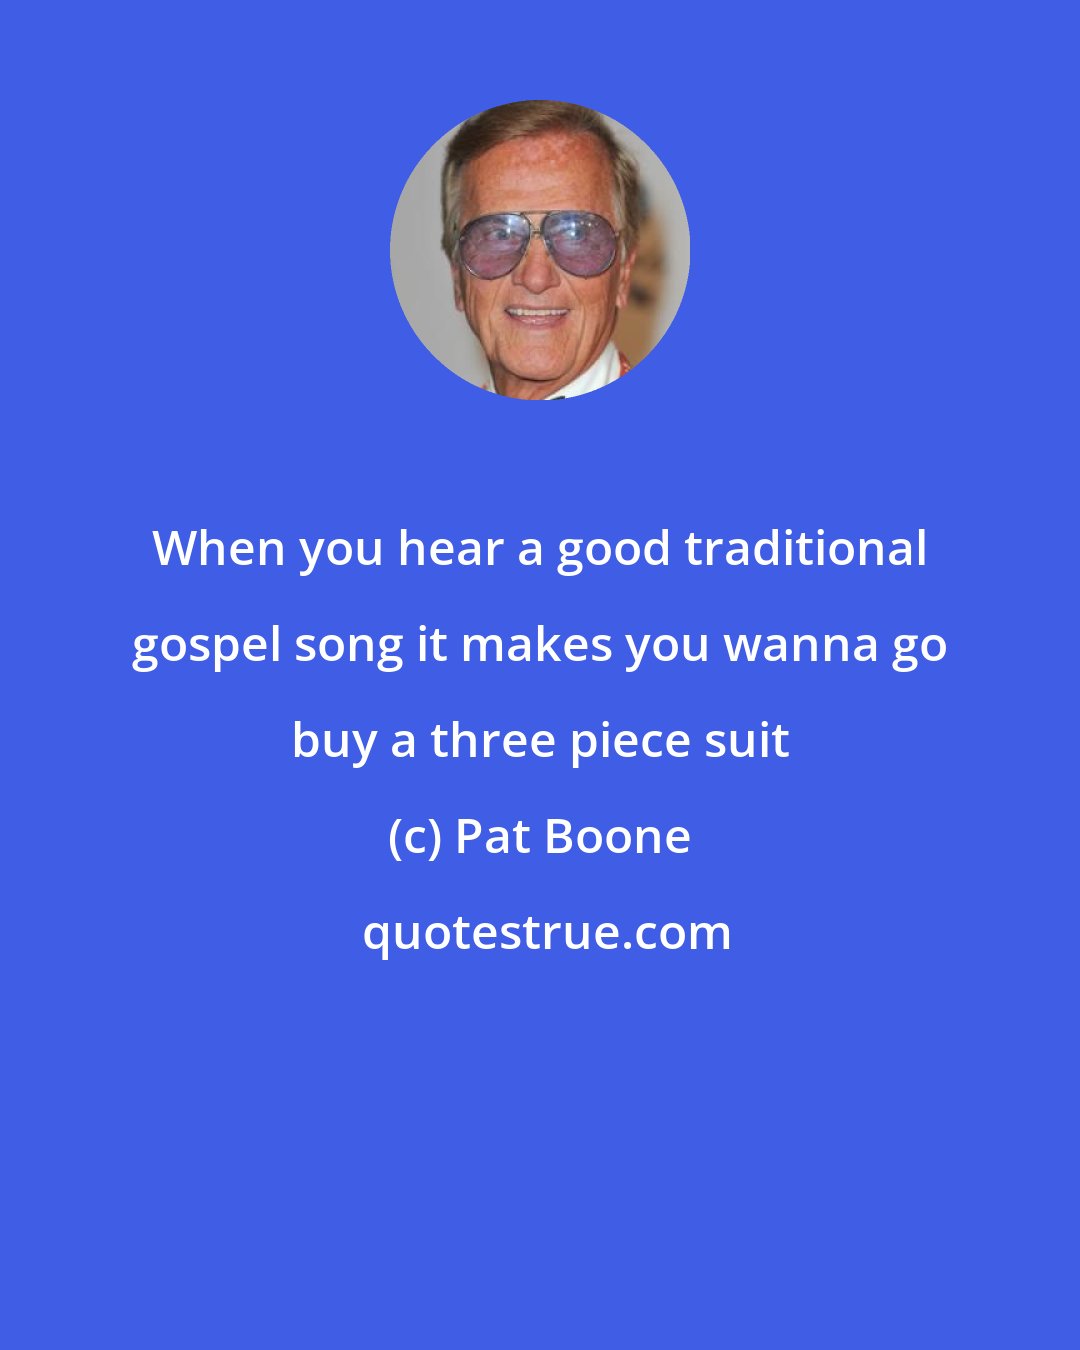 Pat Boone: When you hear a good traditional gospel song it makes you wanna go buy a three piece suit